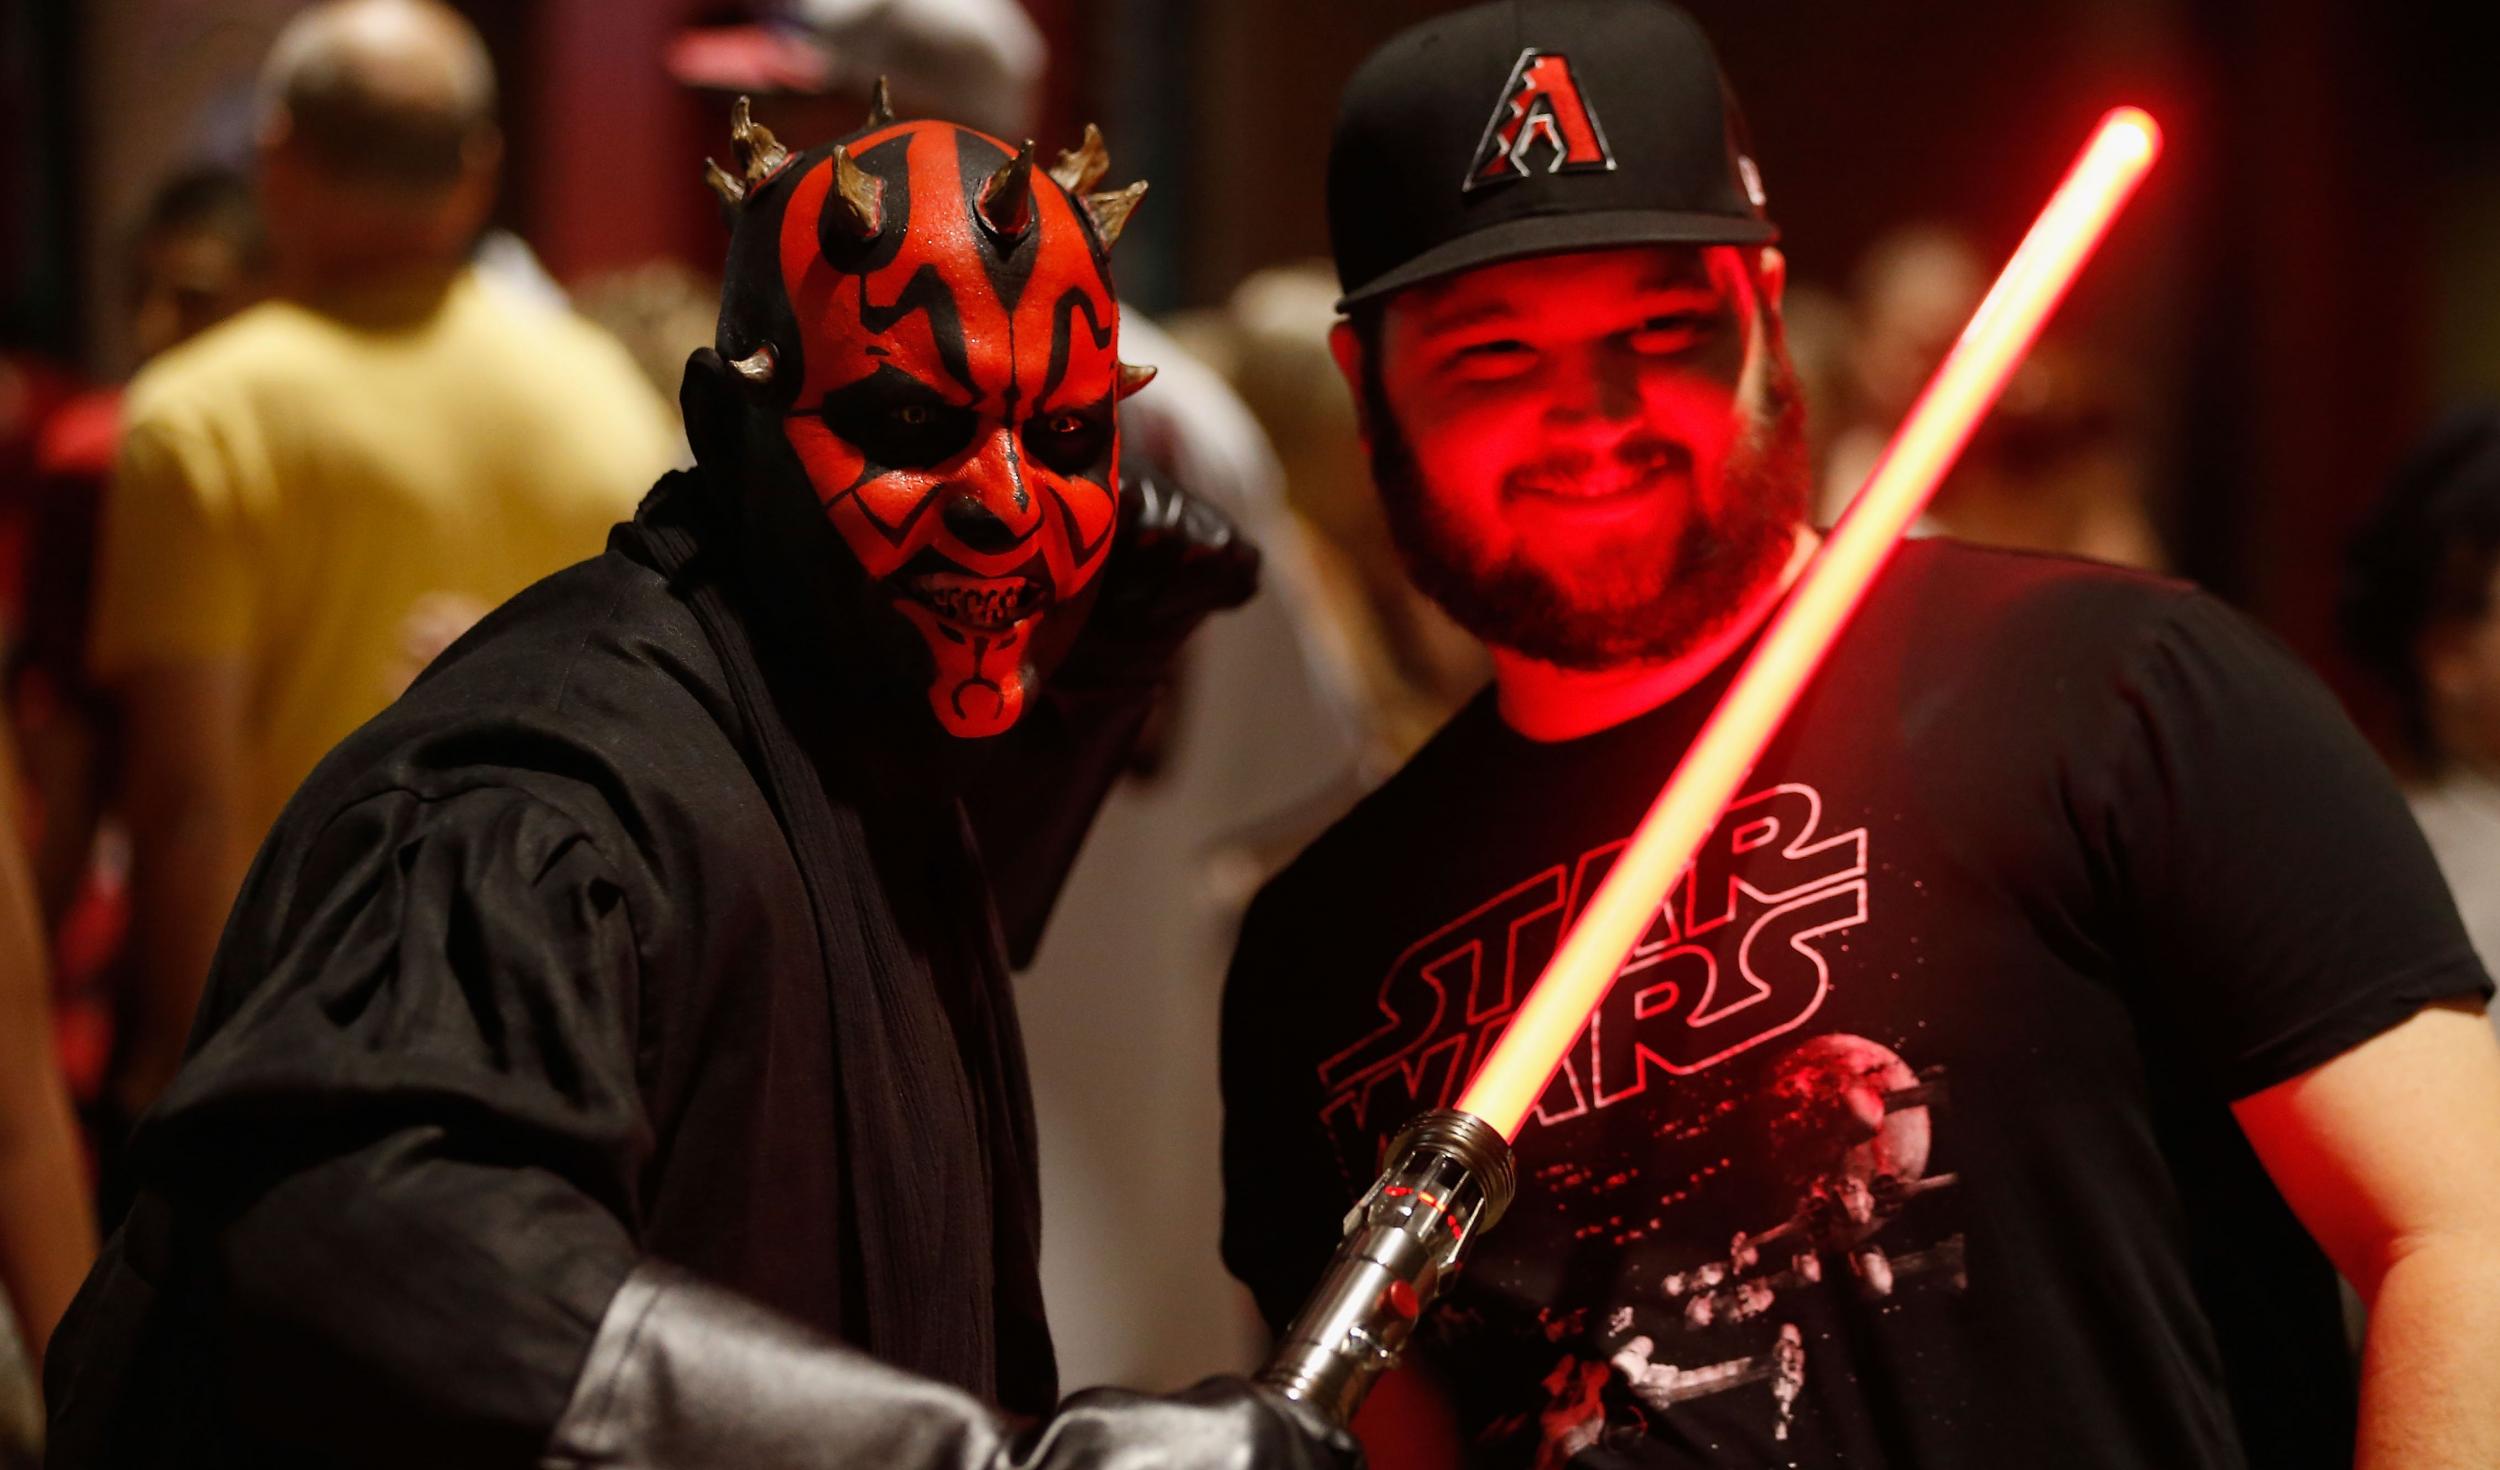 Star Wars themed fans mingle the concourse in honor of the franchise